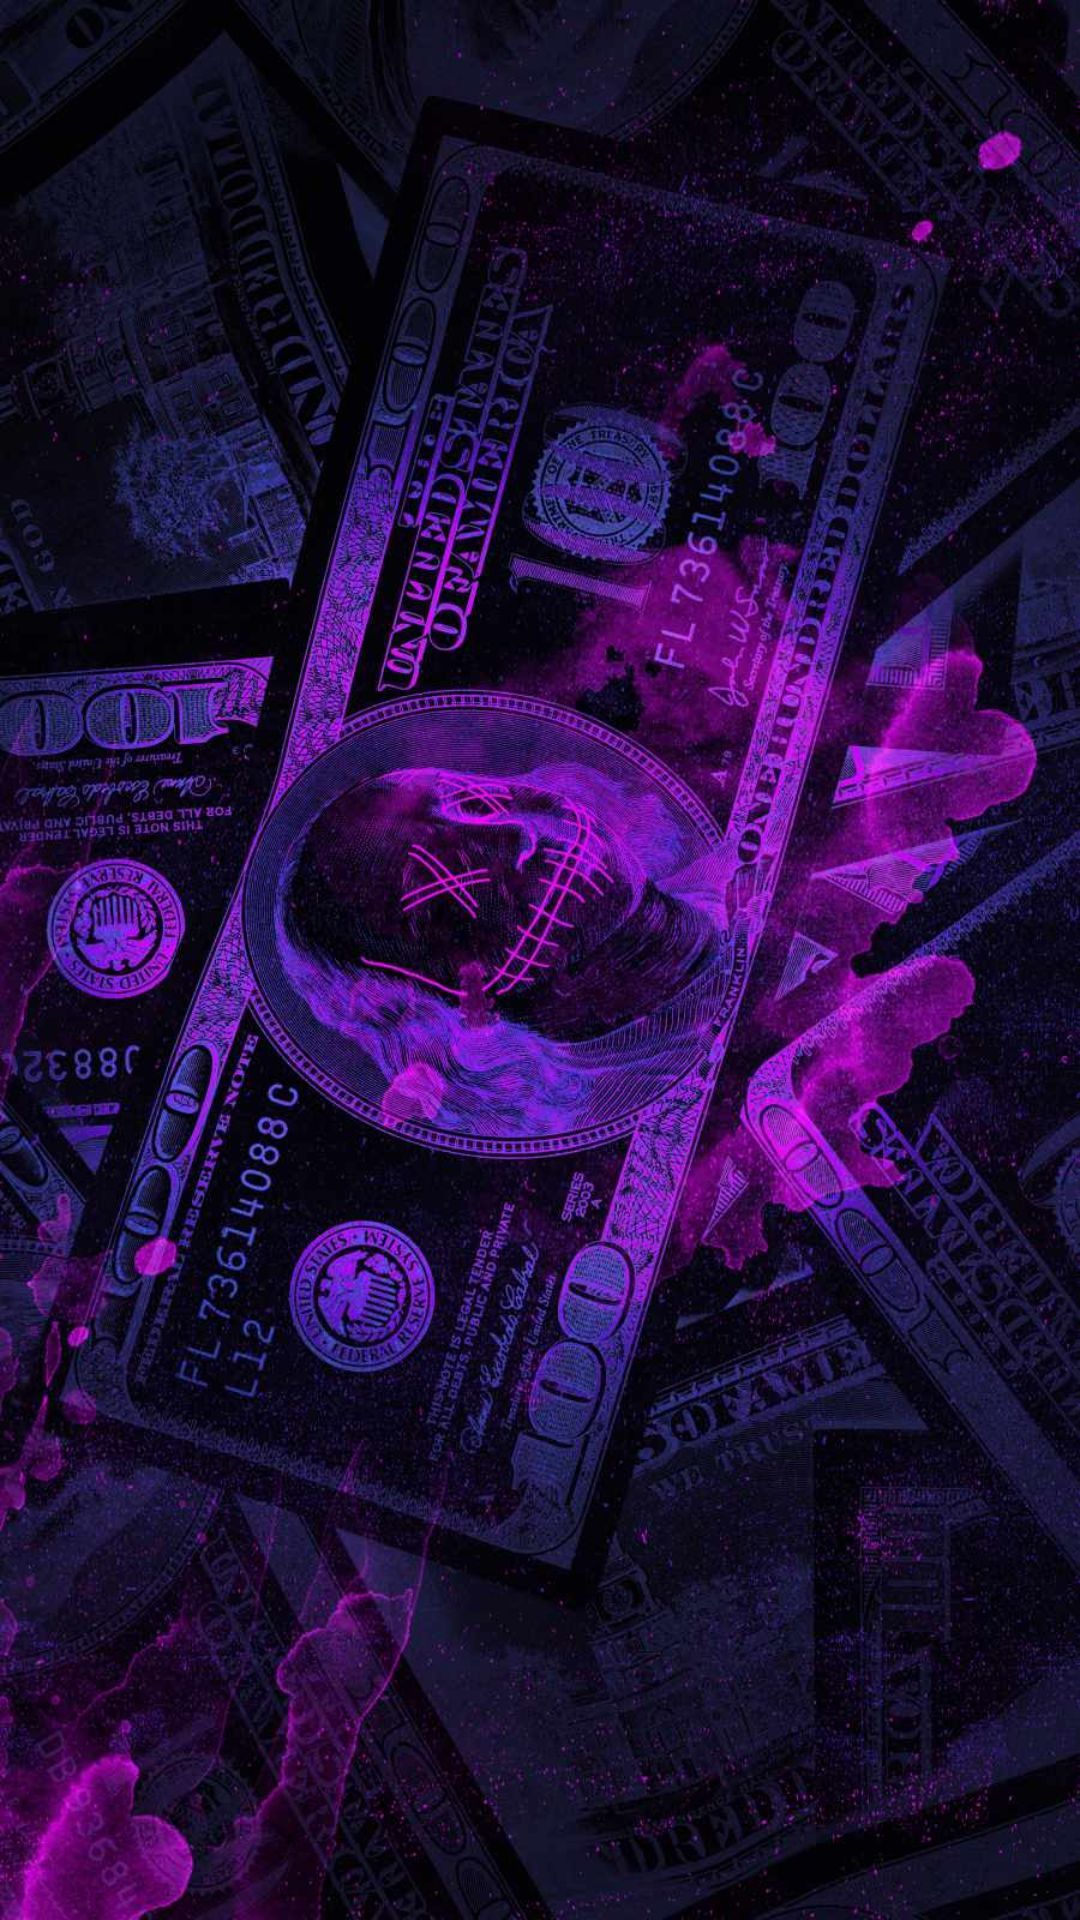 IPhone wallpaper with a pile of money. - Money